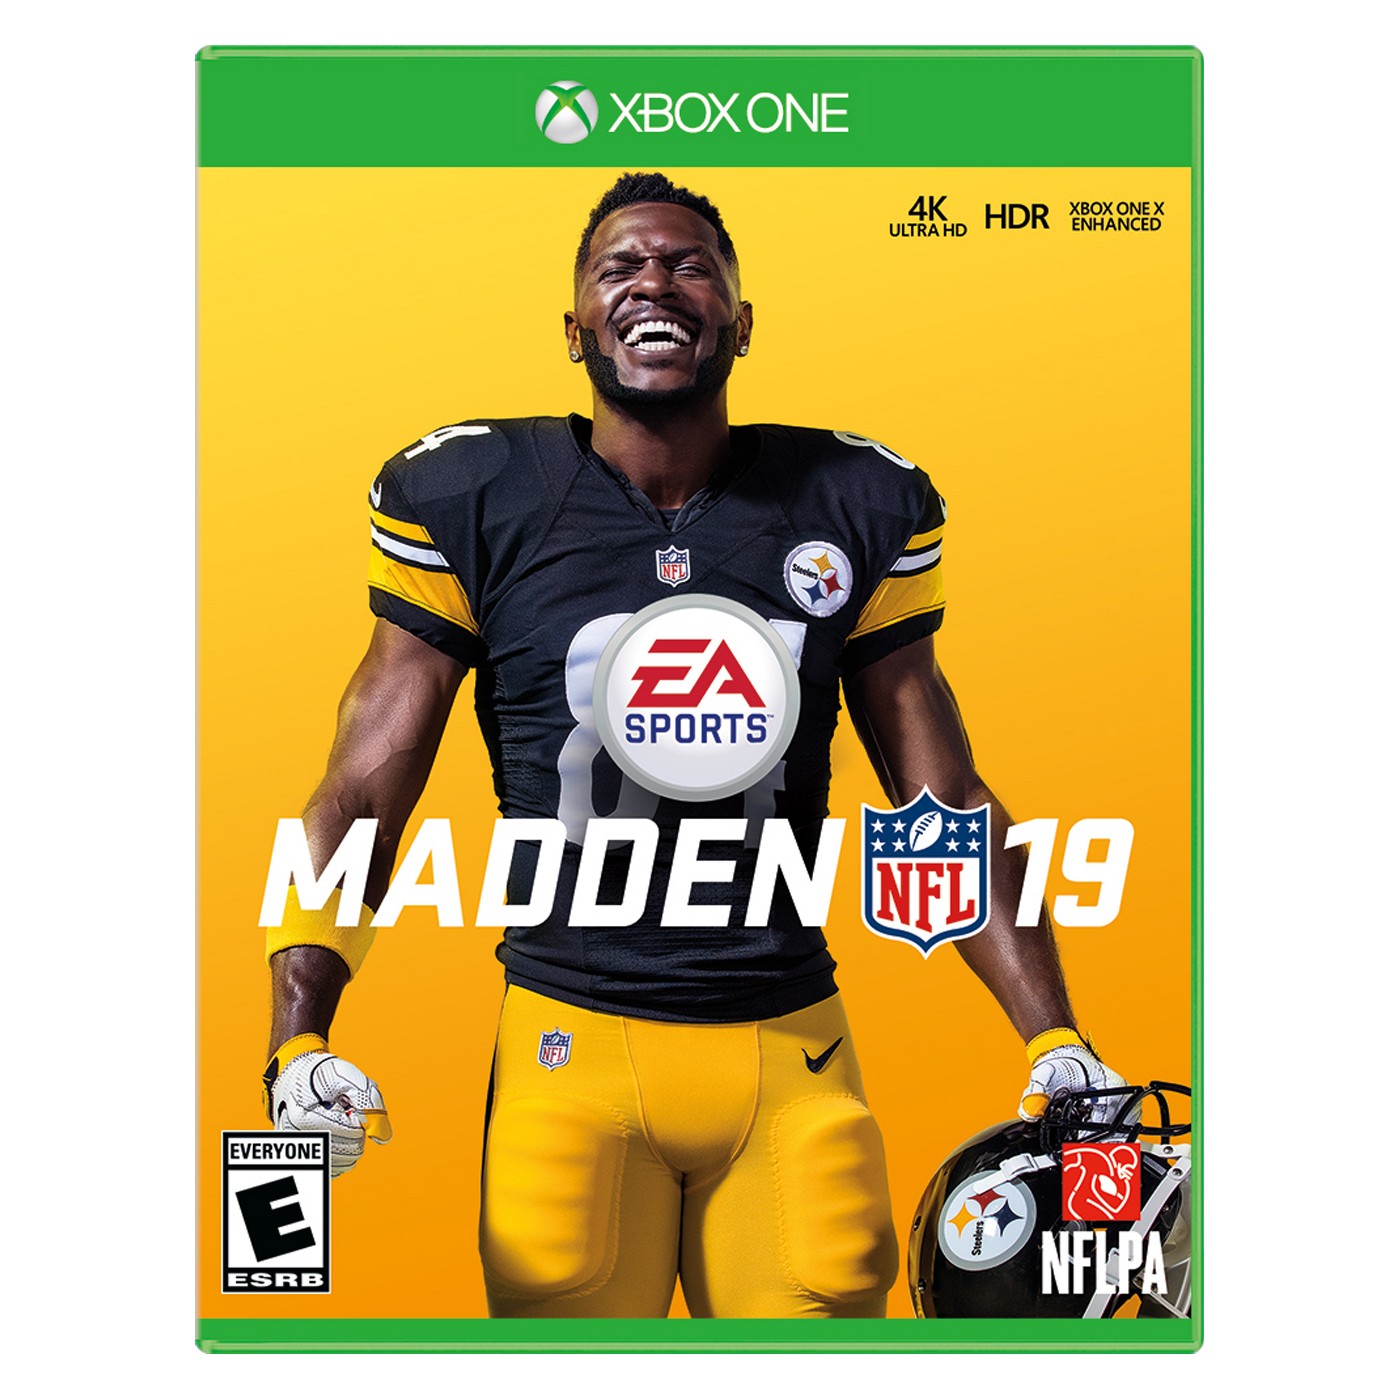 Madden NFL 19, Electronic Arts, Xbox One, [Physical], 014633371758 - image 5 of 5